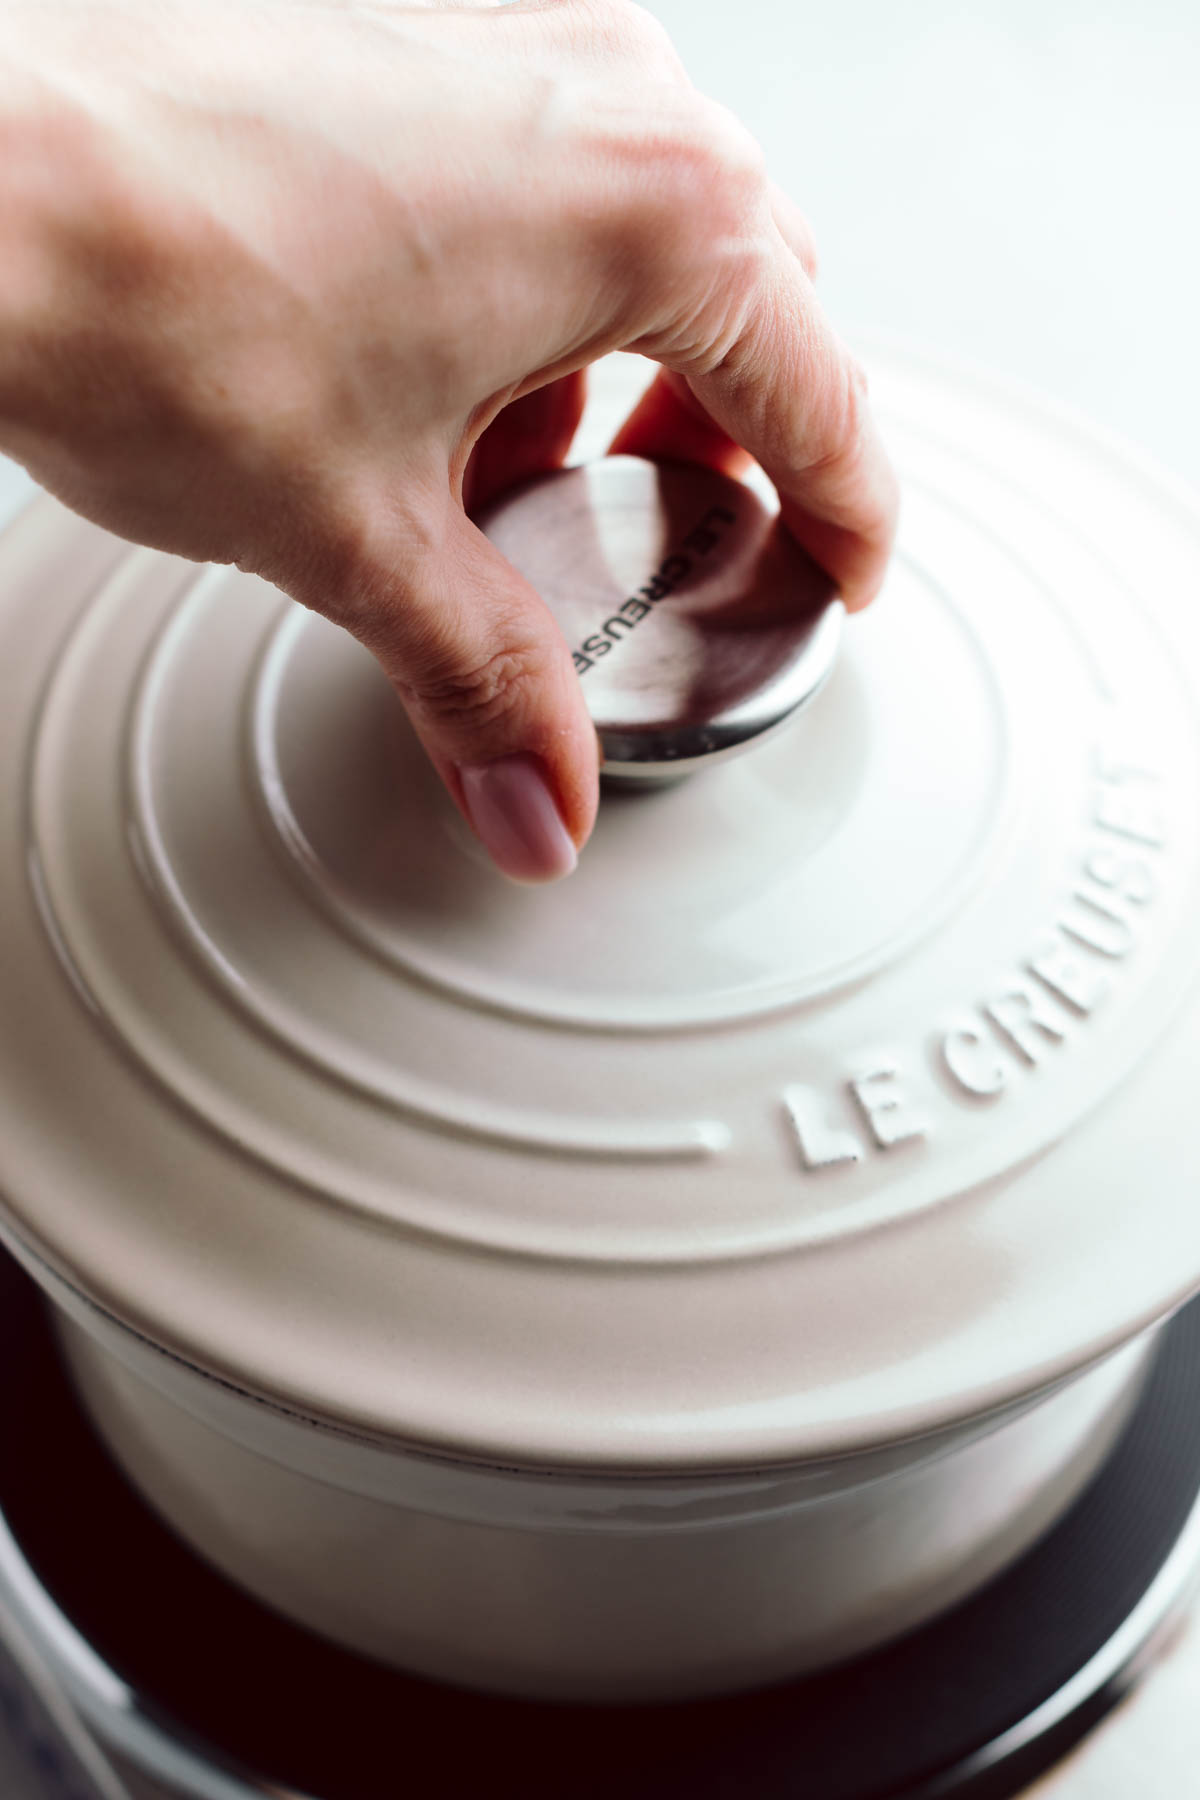 A light colored pot on a stove with a lid and a hand on top of the lid.